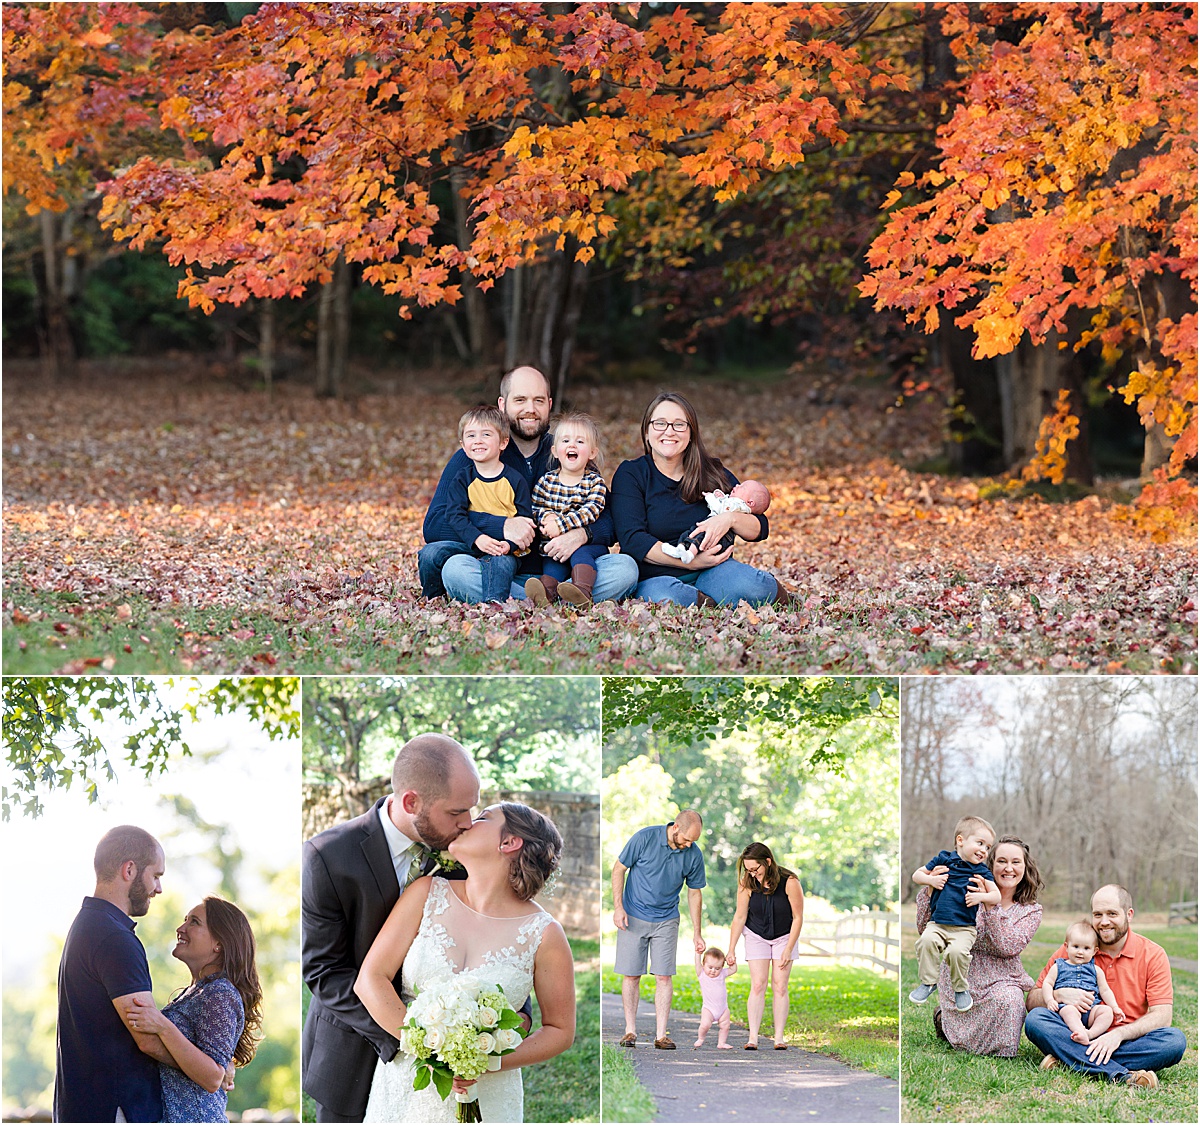 One couple photographed over eight years from engagement to family of five